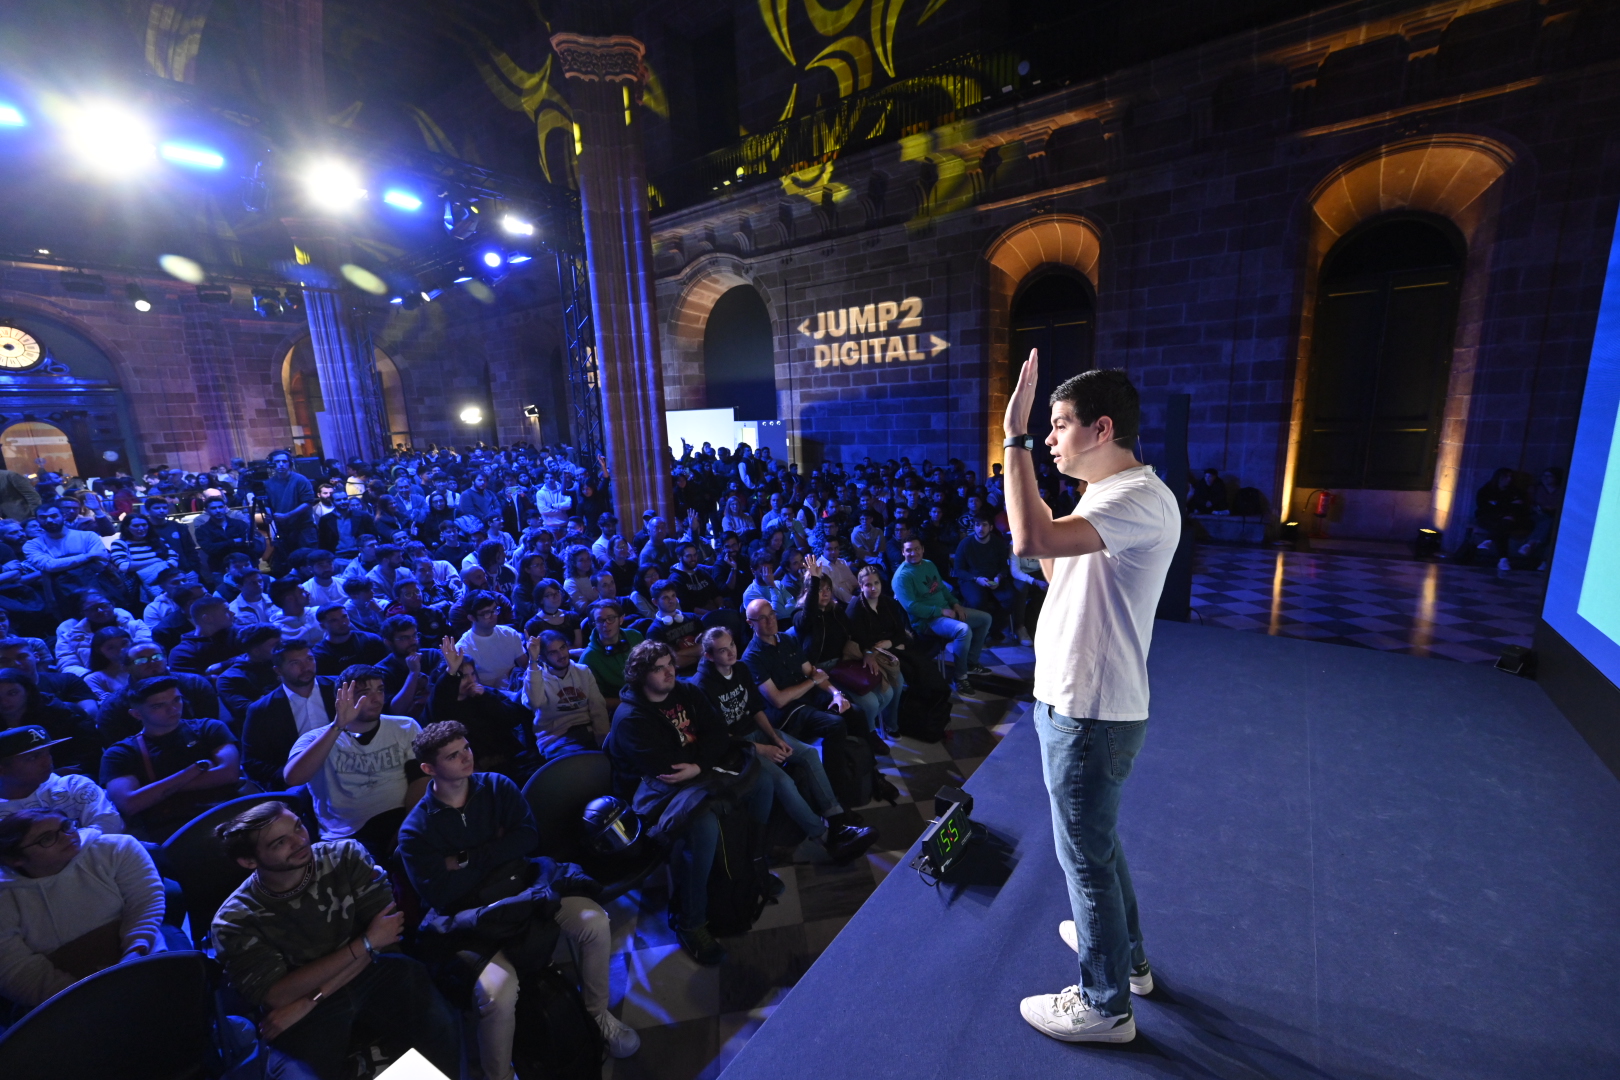 Barcelona’s largest digital talent event Jump2Digital brings together content creators, companies and young people